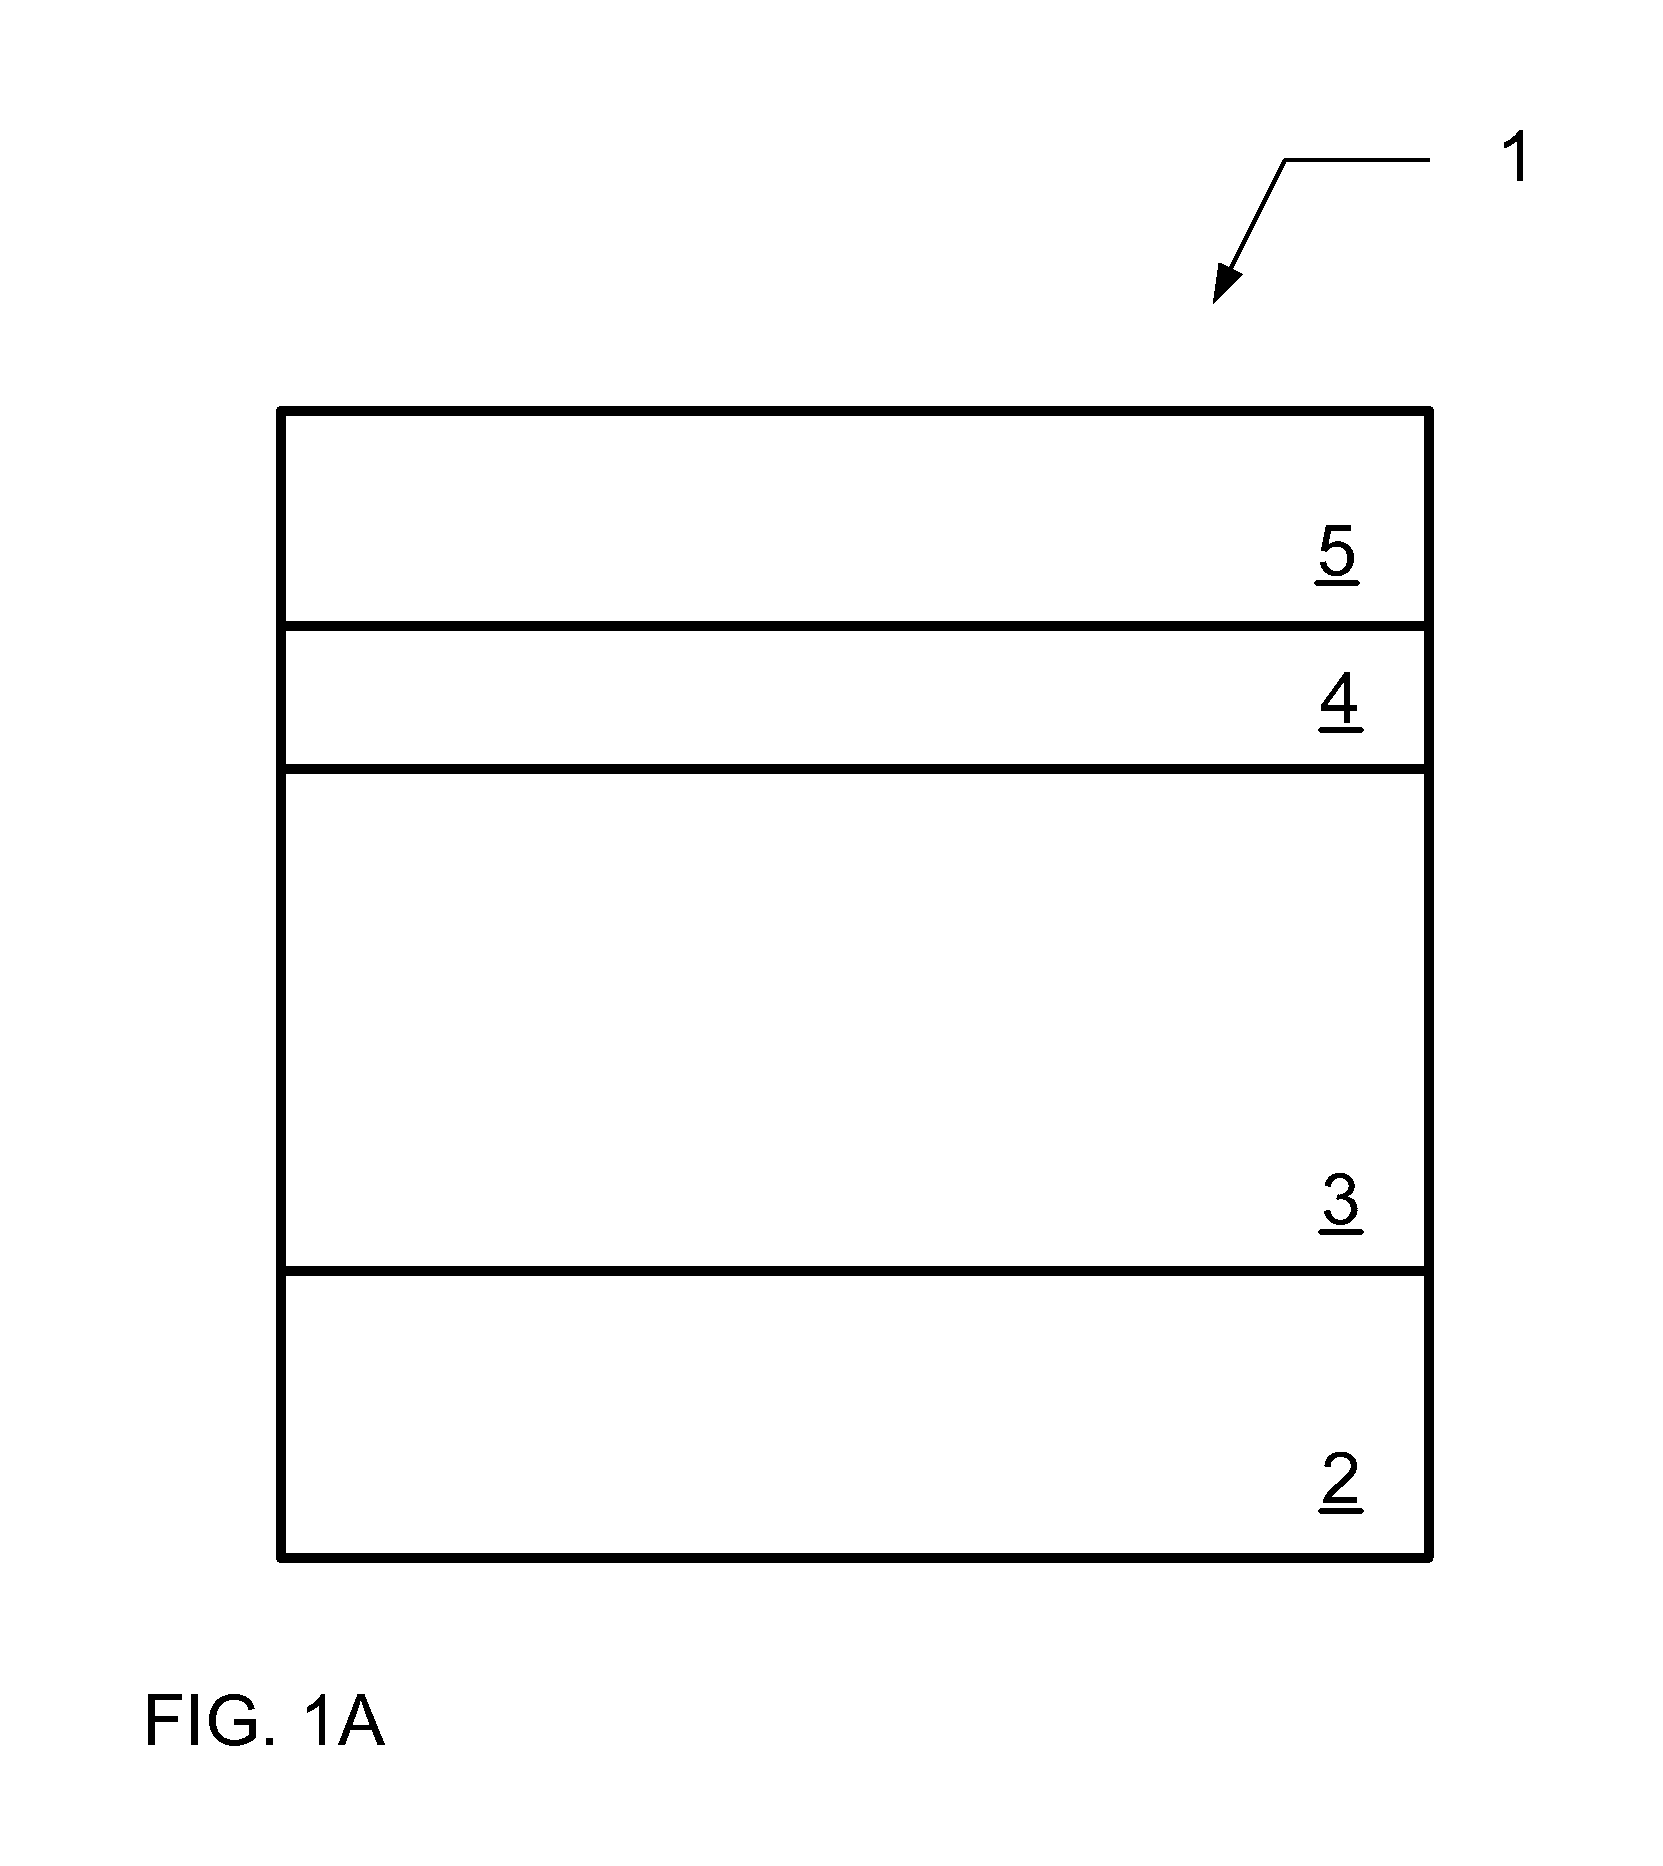 Method for metallizing a pattern in a dielectric film